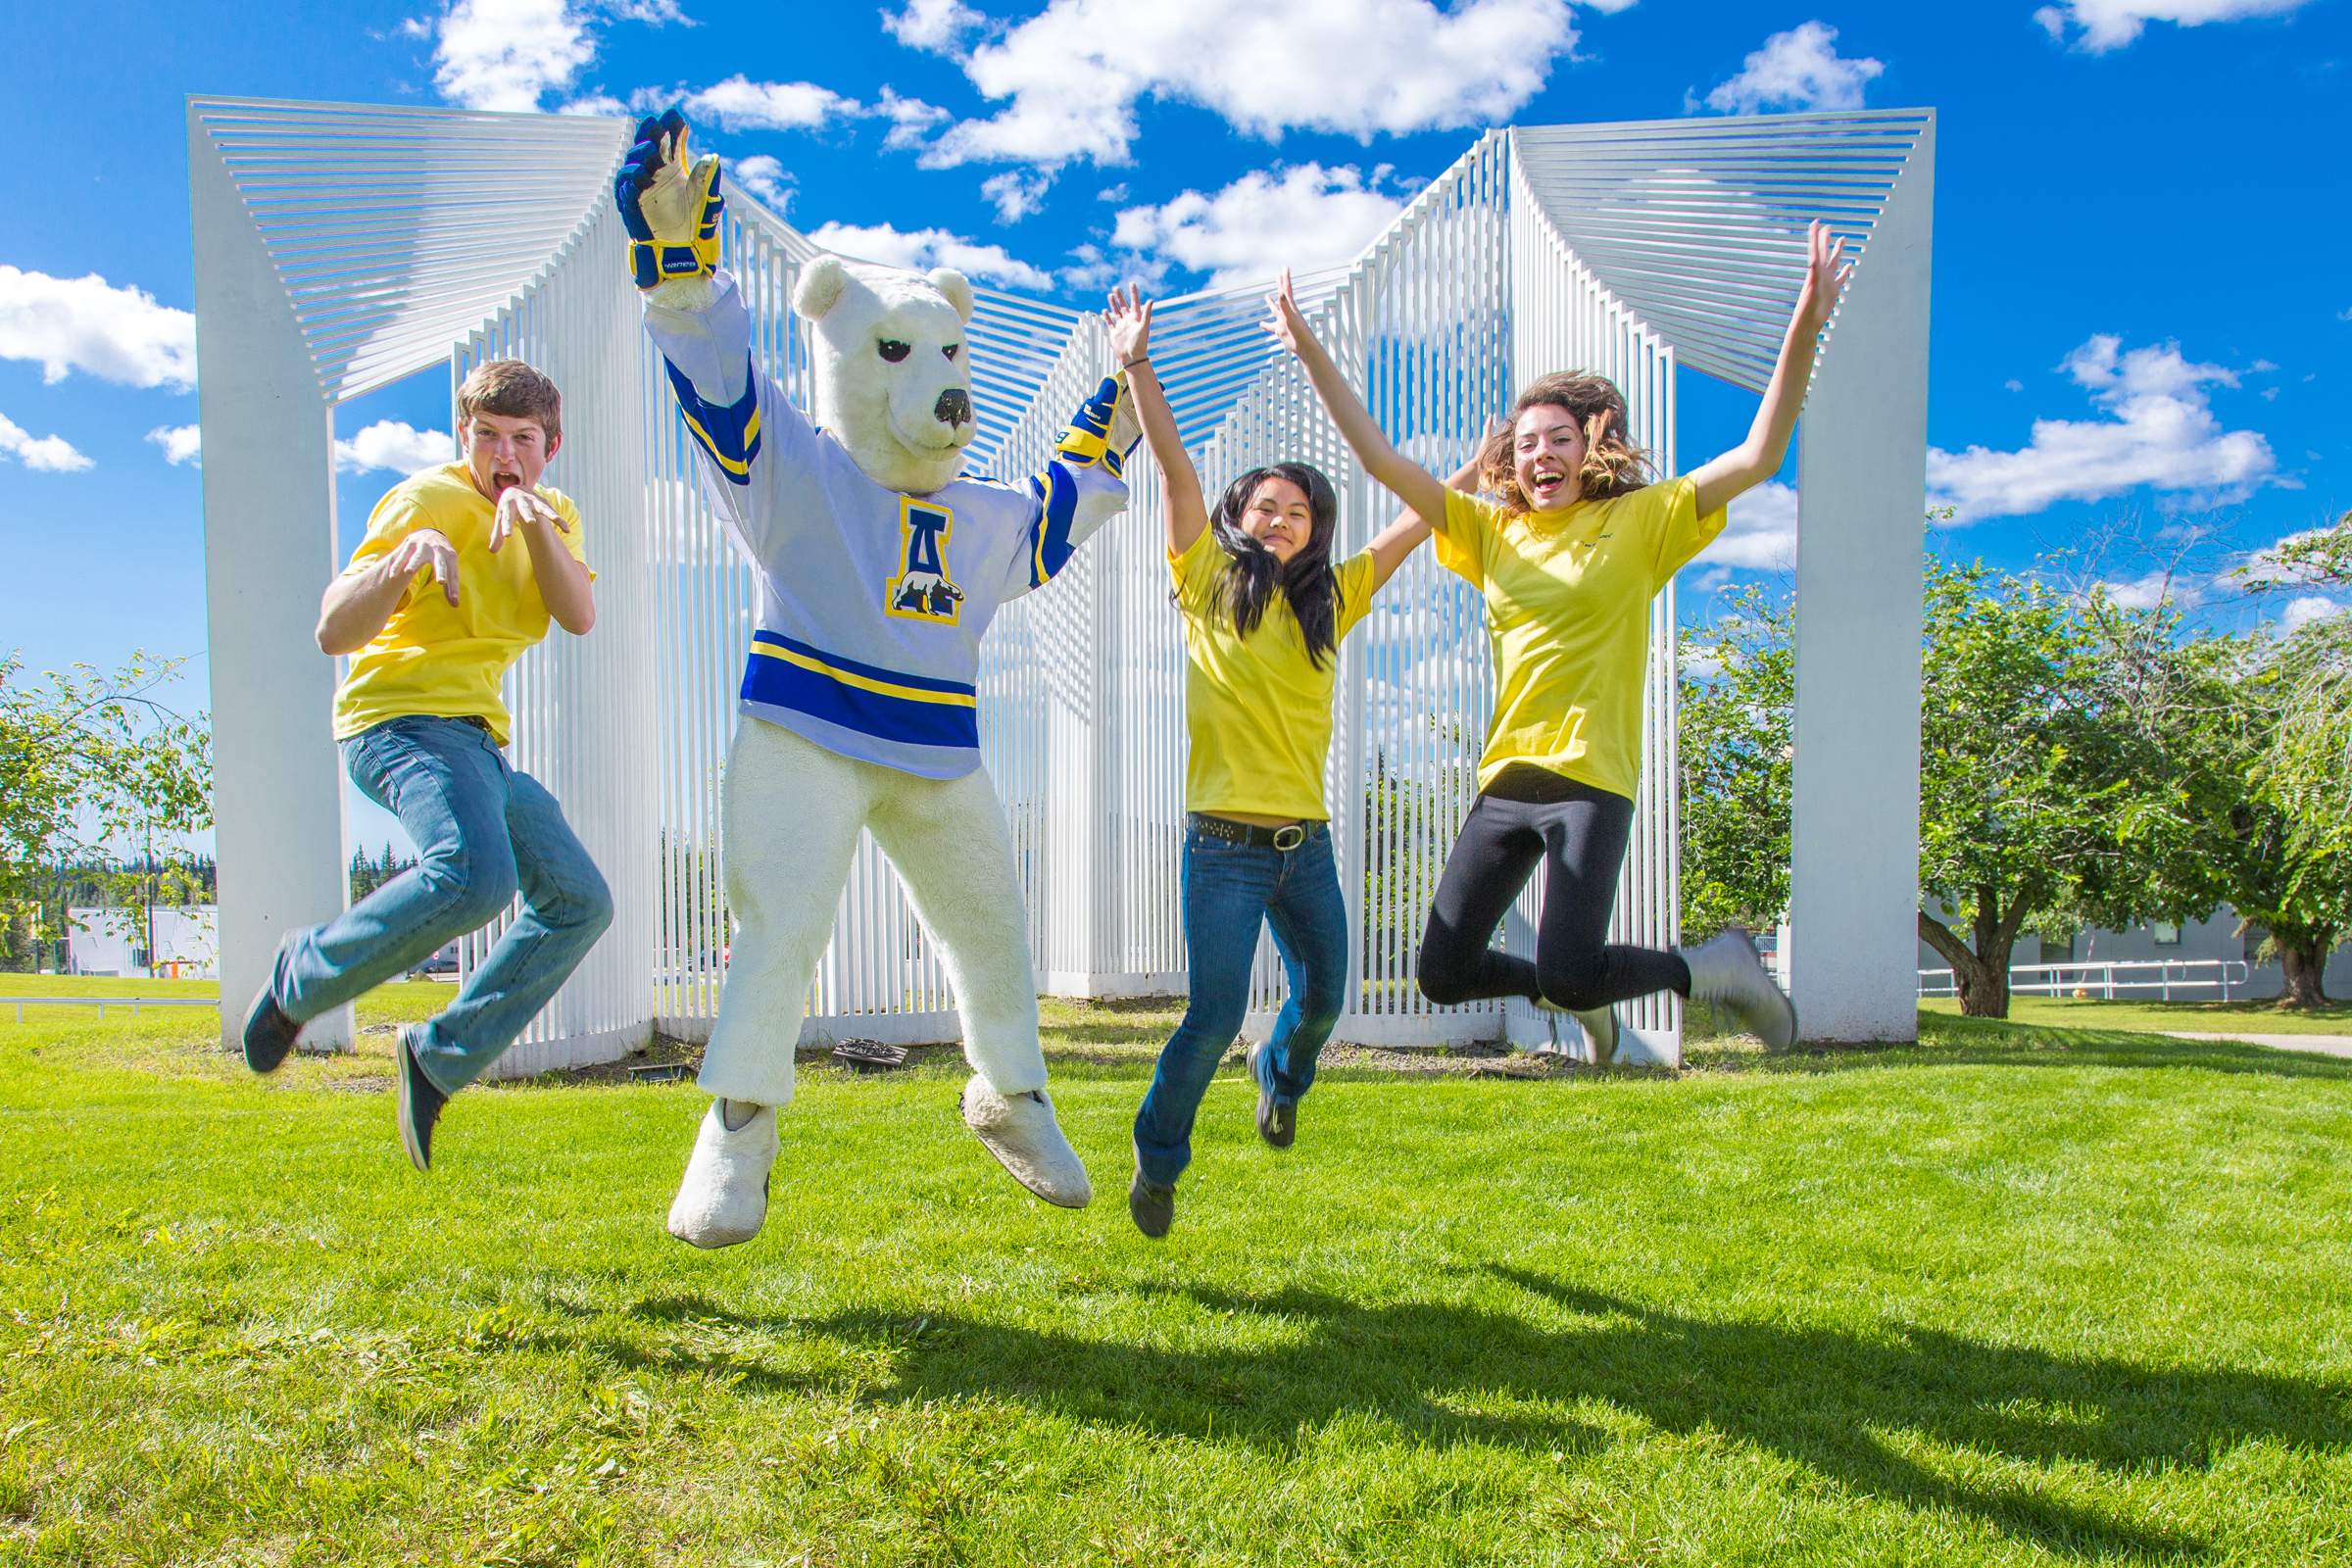 Student interns with the Alaska Business Week summer camp pose on the Fairbanks campus. UAF photo by Todd Paris.